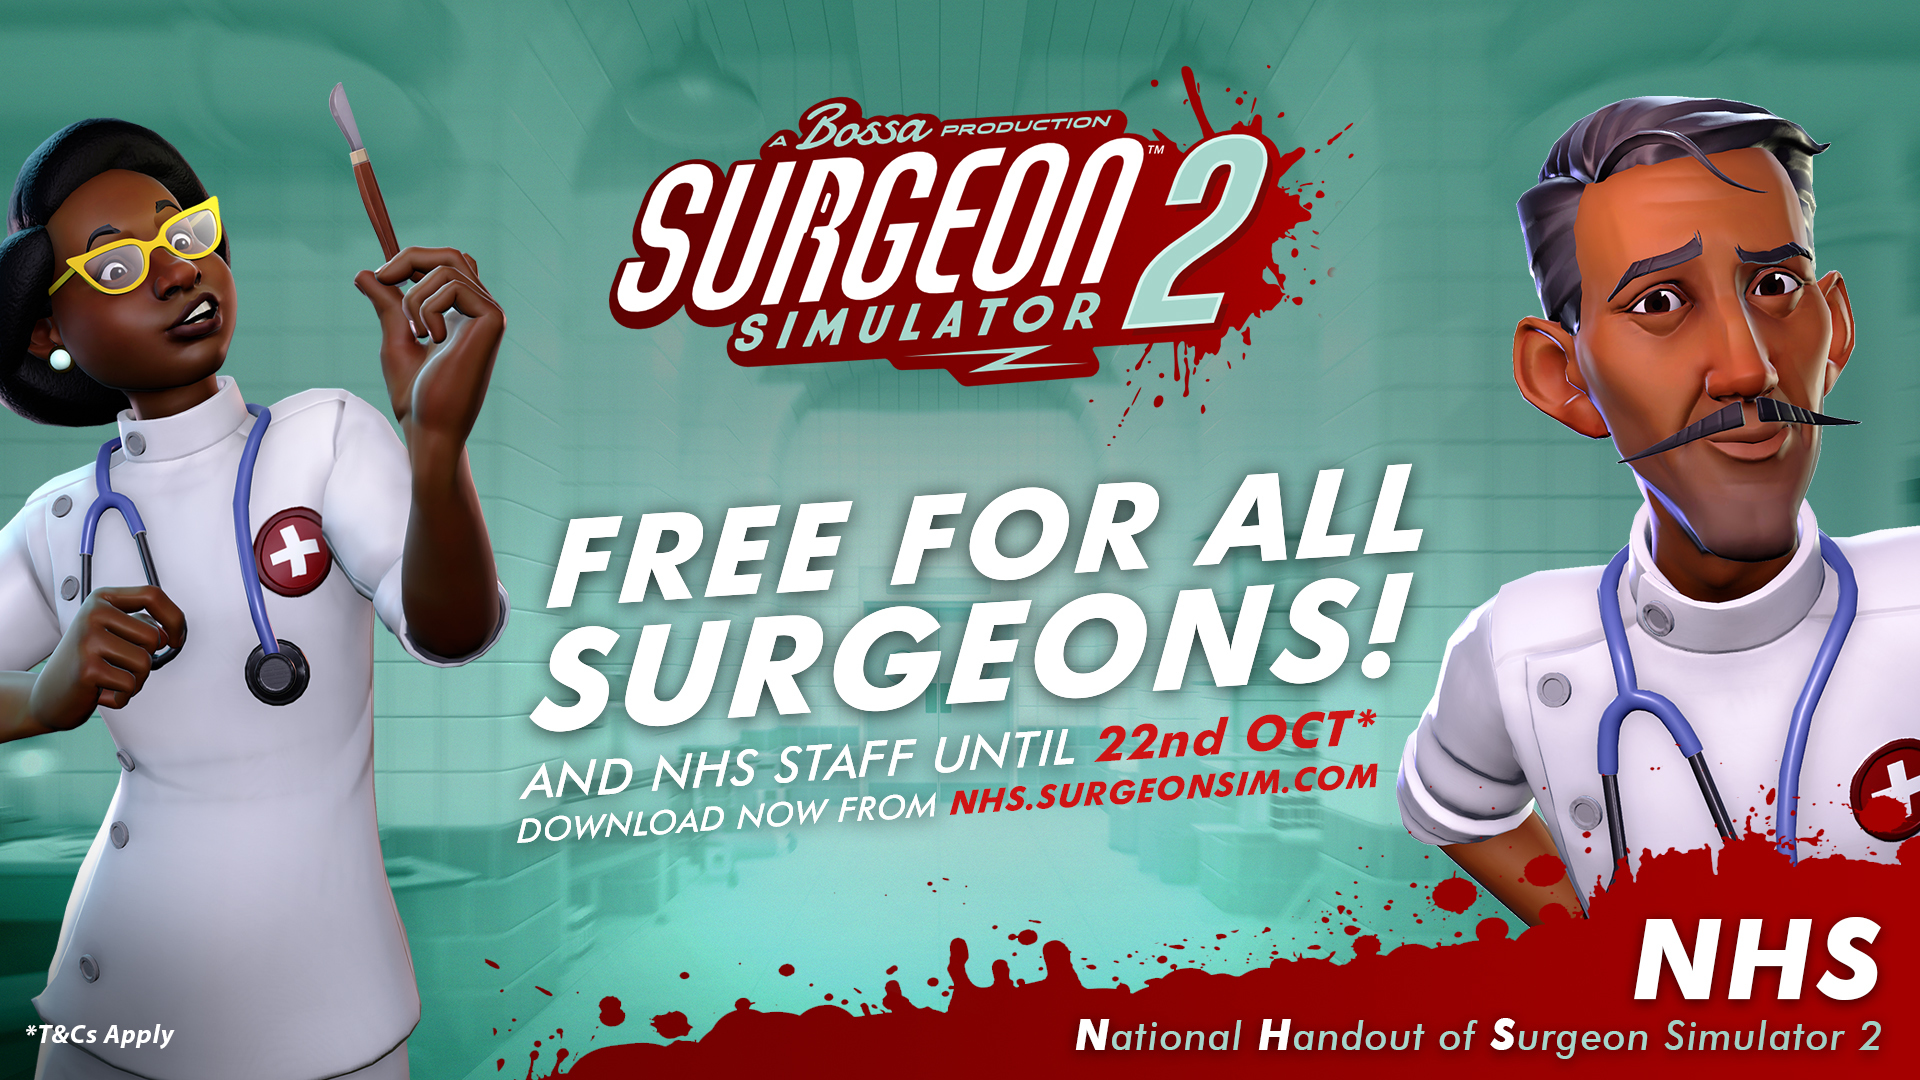 Real surgeons in the UK get Surgeon Simulator 2 for free